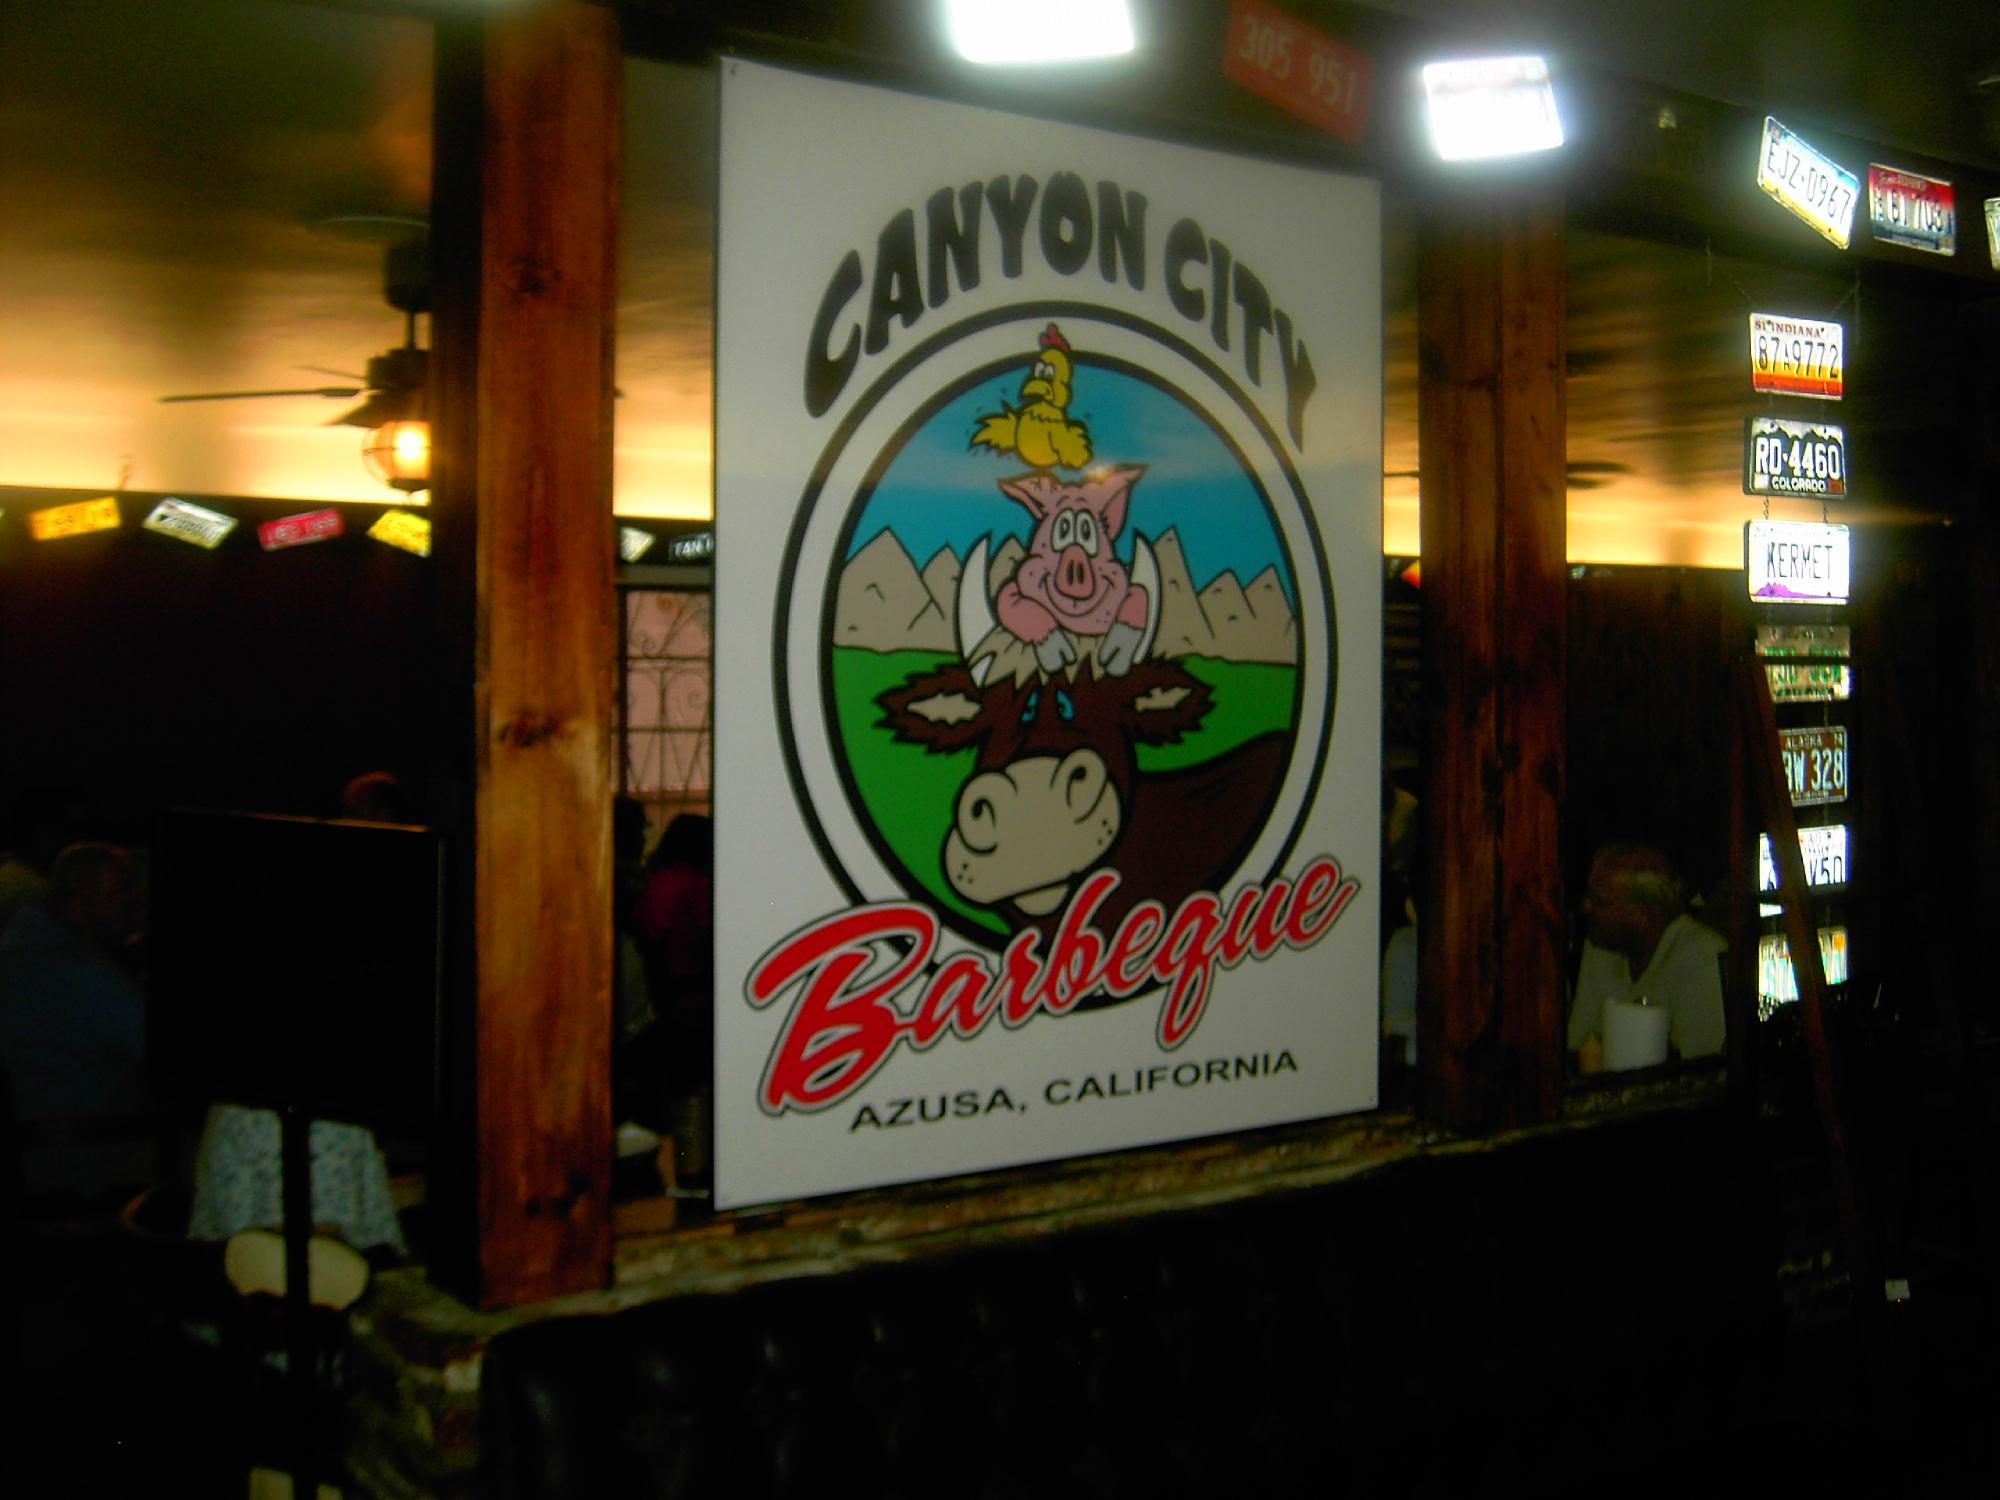 Canyon City Barbeque